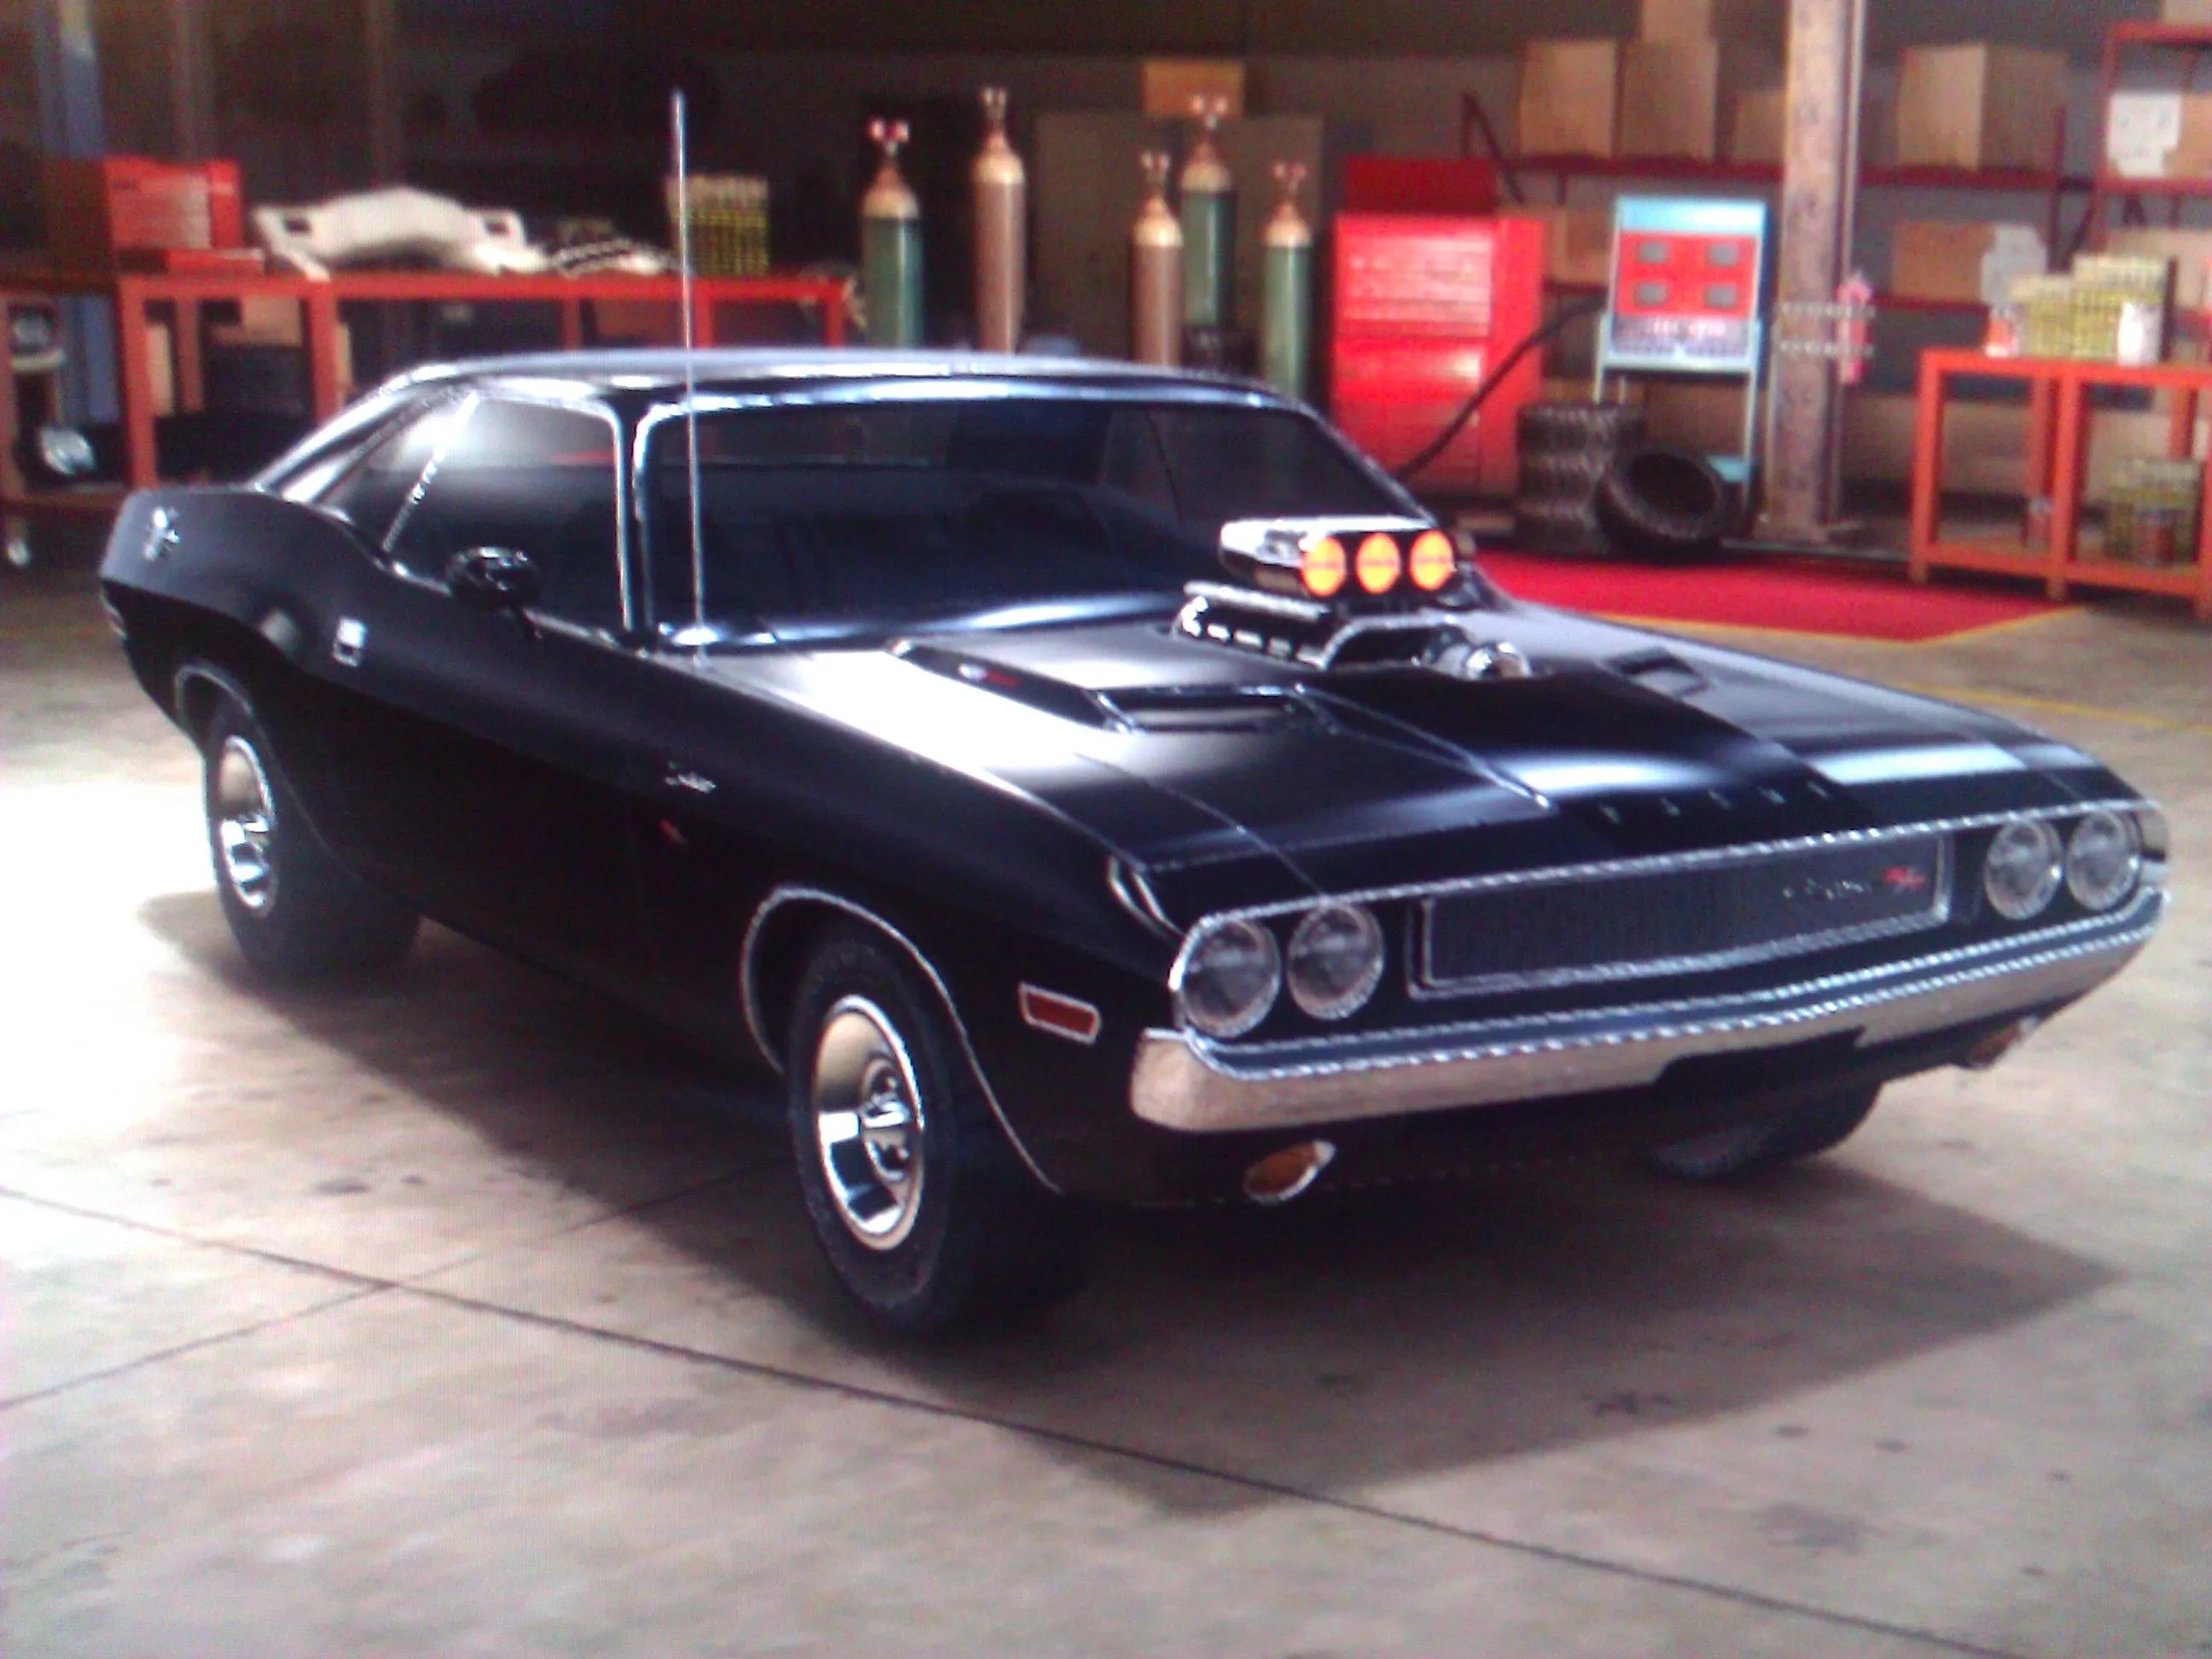 1970 Challenger by DravenMasters on DeviantArt